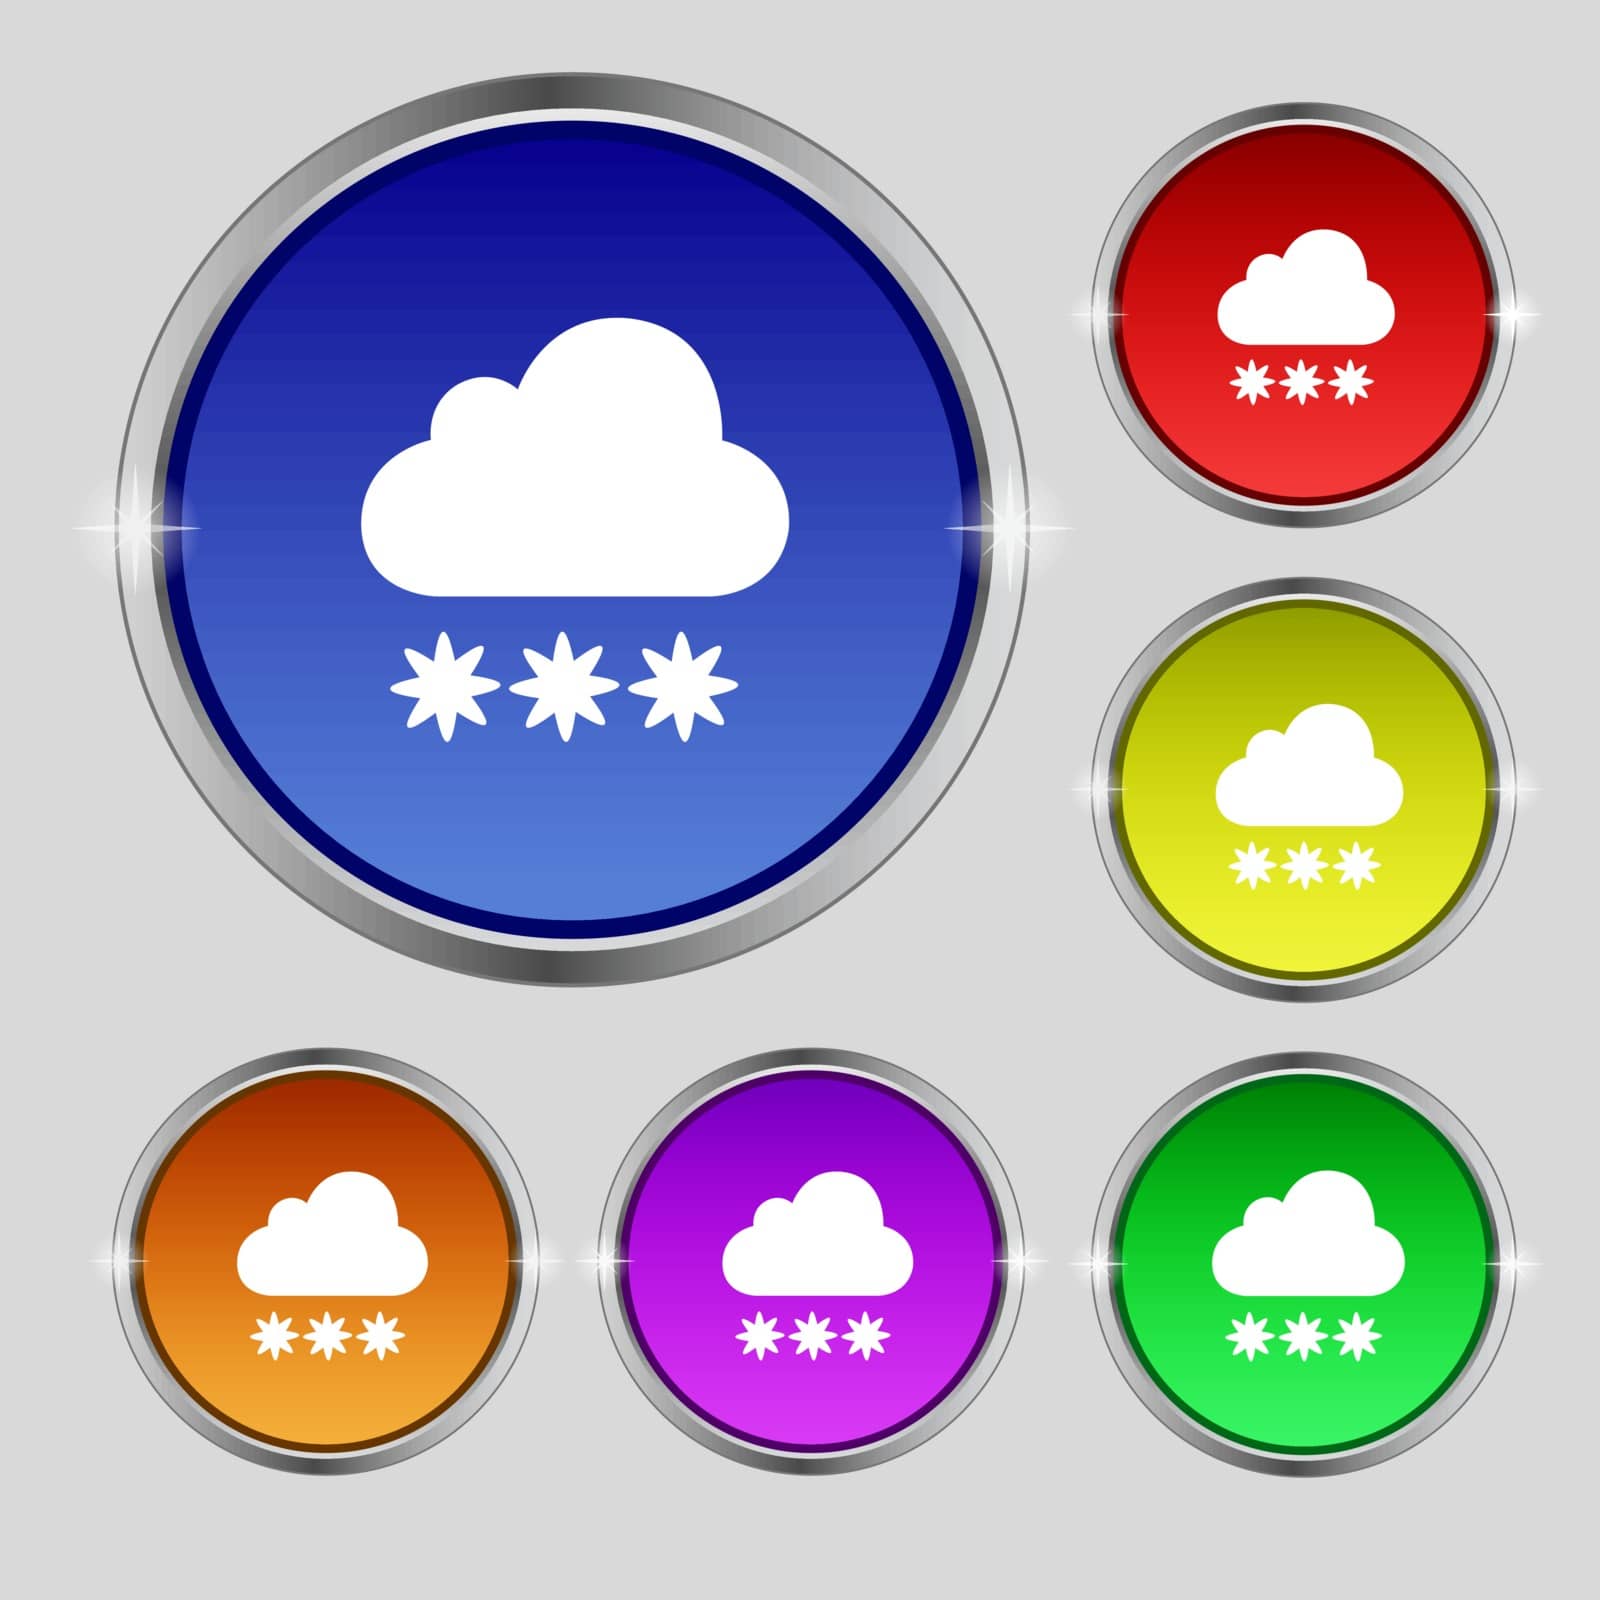 snow cloud icon sign. Round symbol on bright colourful buttons. Vector illustration